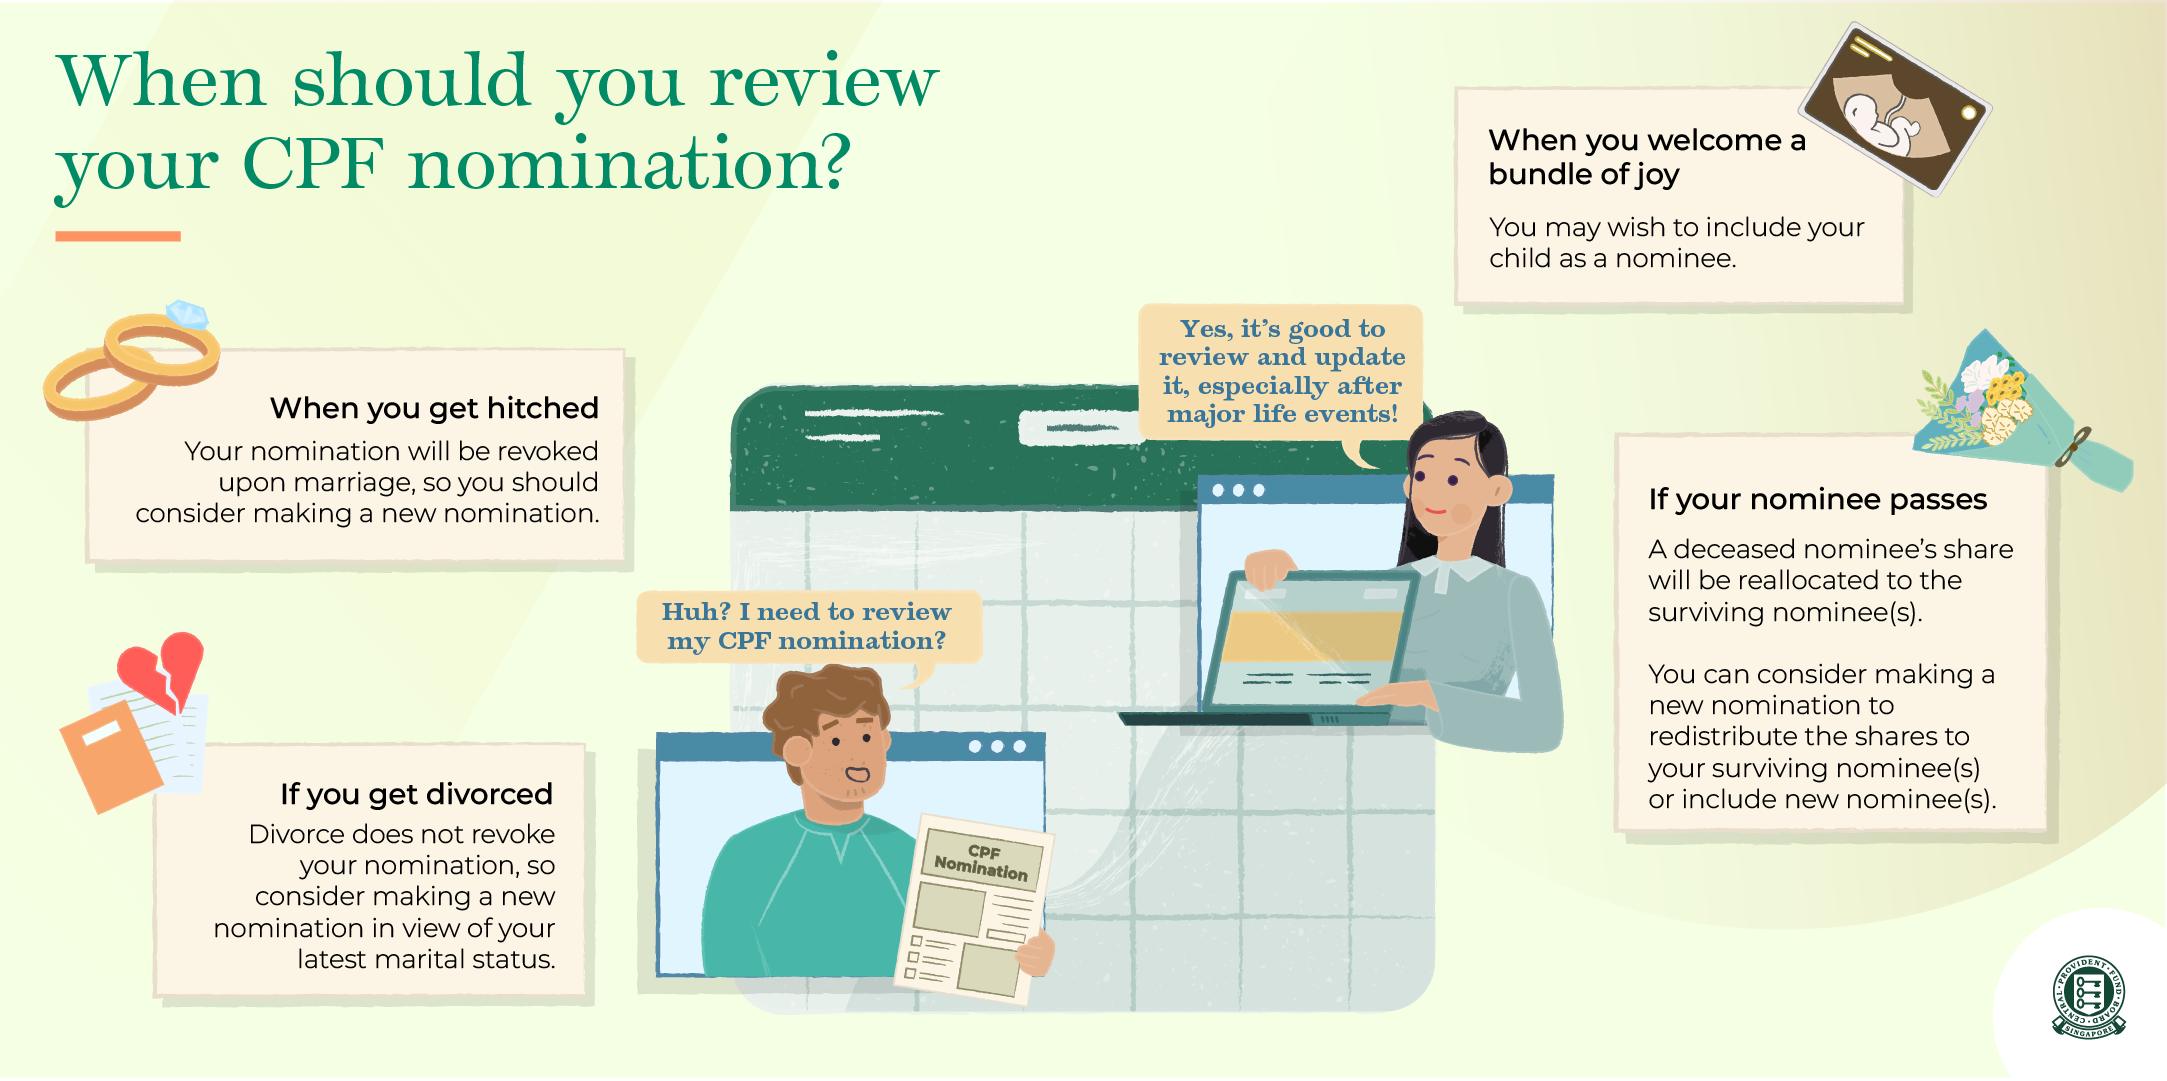 Major life events that members should consider making or reviewing their existing nomination